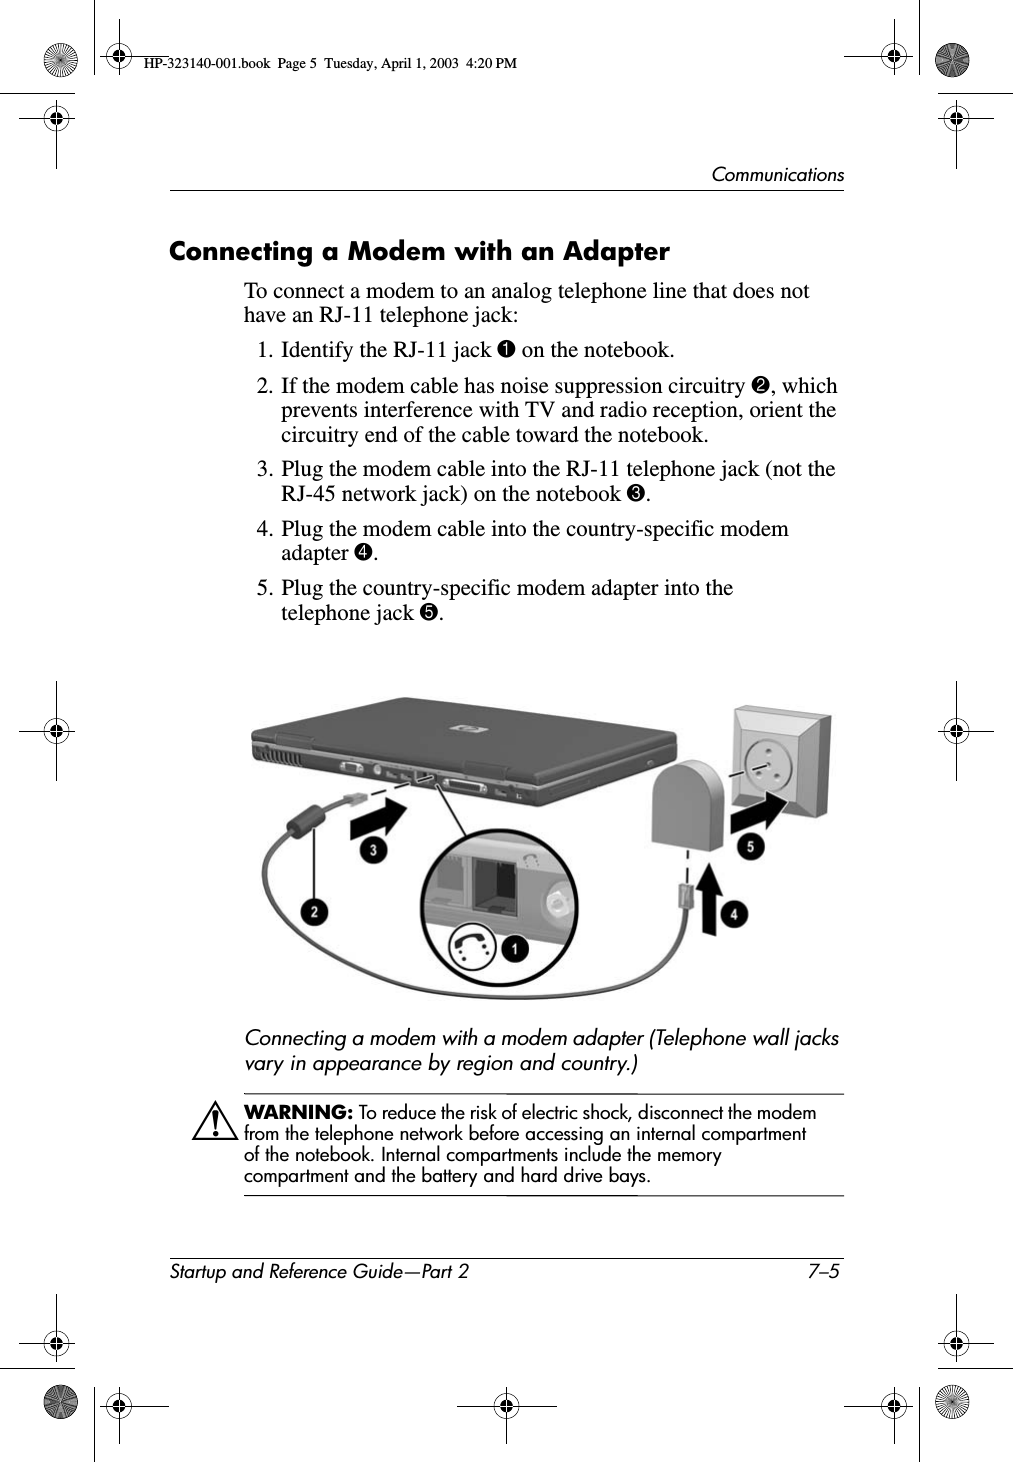 CommunicationsStartup and Reference Guide—Part 2 7–5Connecting a Modem with an AdapterTo connect a modem to an analog telephone line that does not have an RJ-11 telephone jack:1. Identify the RJ-11 jack 1 on the notebook.2. If the modem cable has noise suppression circuitry 2, which prevents interference with TV and radio reception, orient the circuitry end of the cable toward the notebook.3. Plug the modem cable into the RJ-11 telephone jack (not the RJ-45 network jack) on the notebook 3.4. Plug the modem cable into the country-specific modem adapter 4.5. Plug the country-specific modem adapter into the telephone jack 5.Connecting a modem with a modem adapter (Telephone wall jacks vary in appearance by region and country.)ÅWARNING: To reduce the risk of electric shock, disconnect the modem from the telephone network before accessing an internal compartment of the notebook. Internal compartments include the memory compartment and the battery and hard drive bays.HP-323140-001.book  Page 5  Tuesday, April 1, 2003  4:20 PM